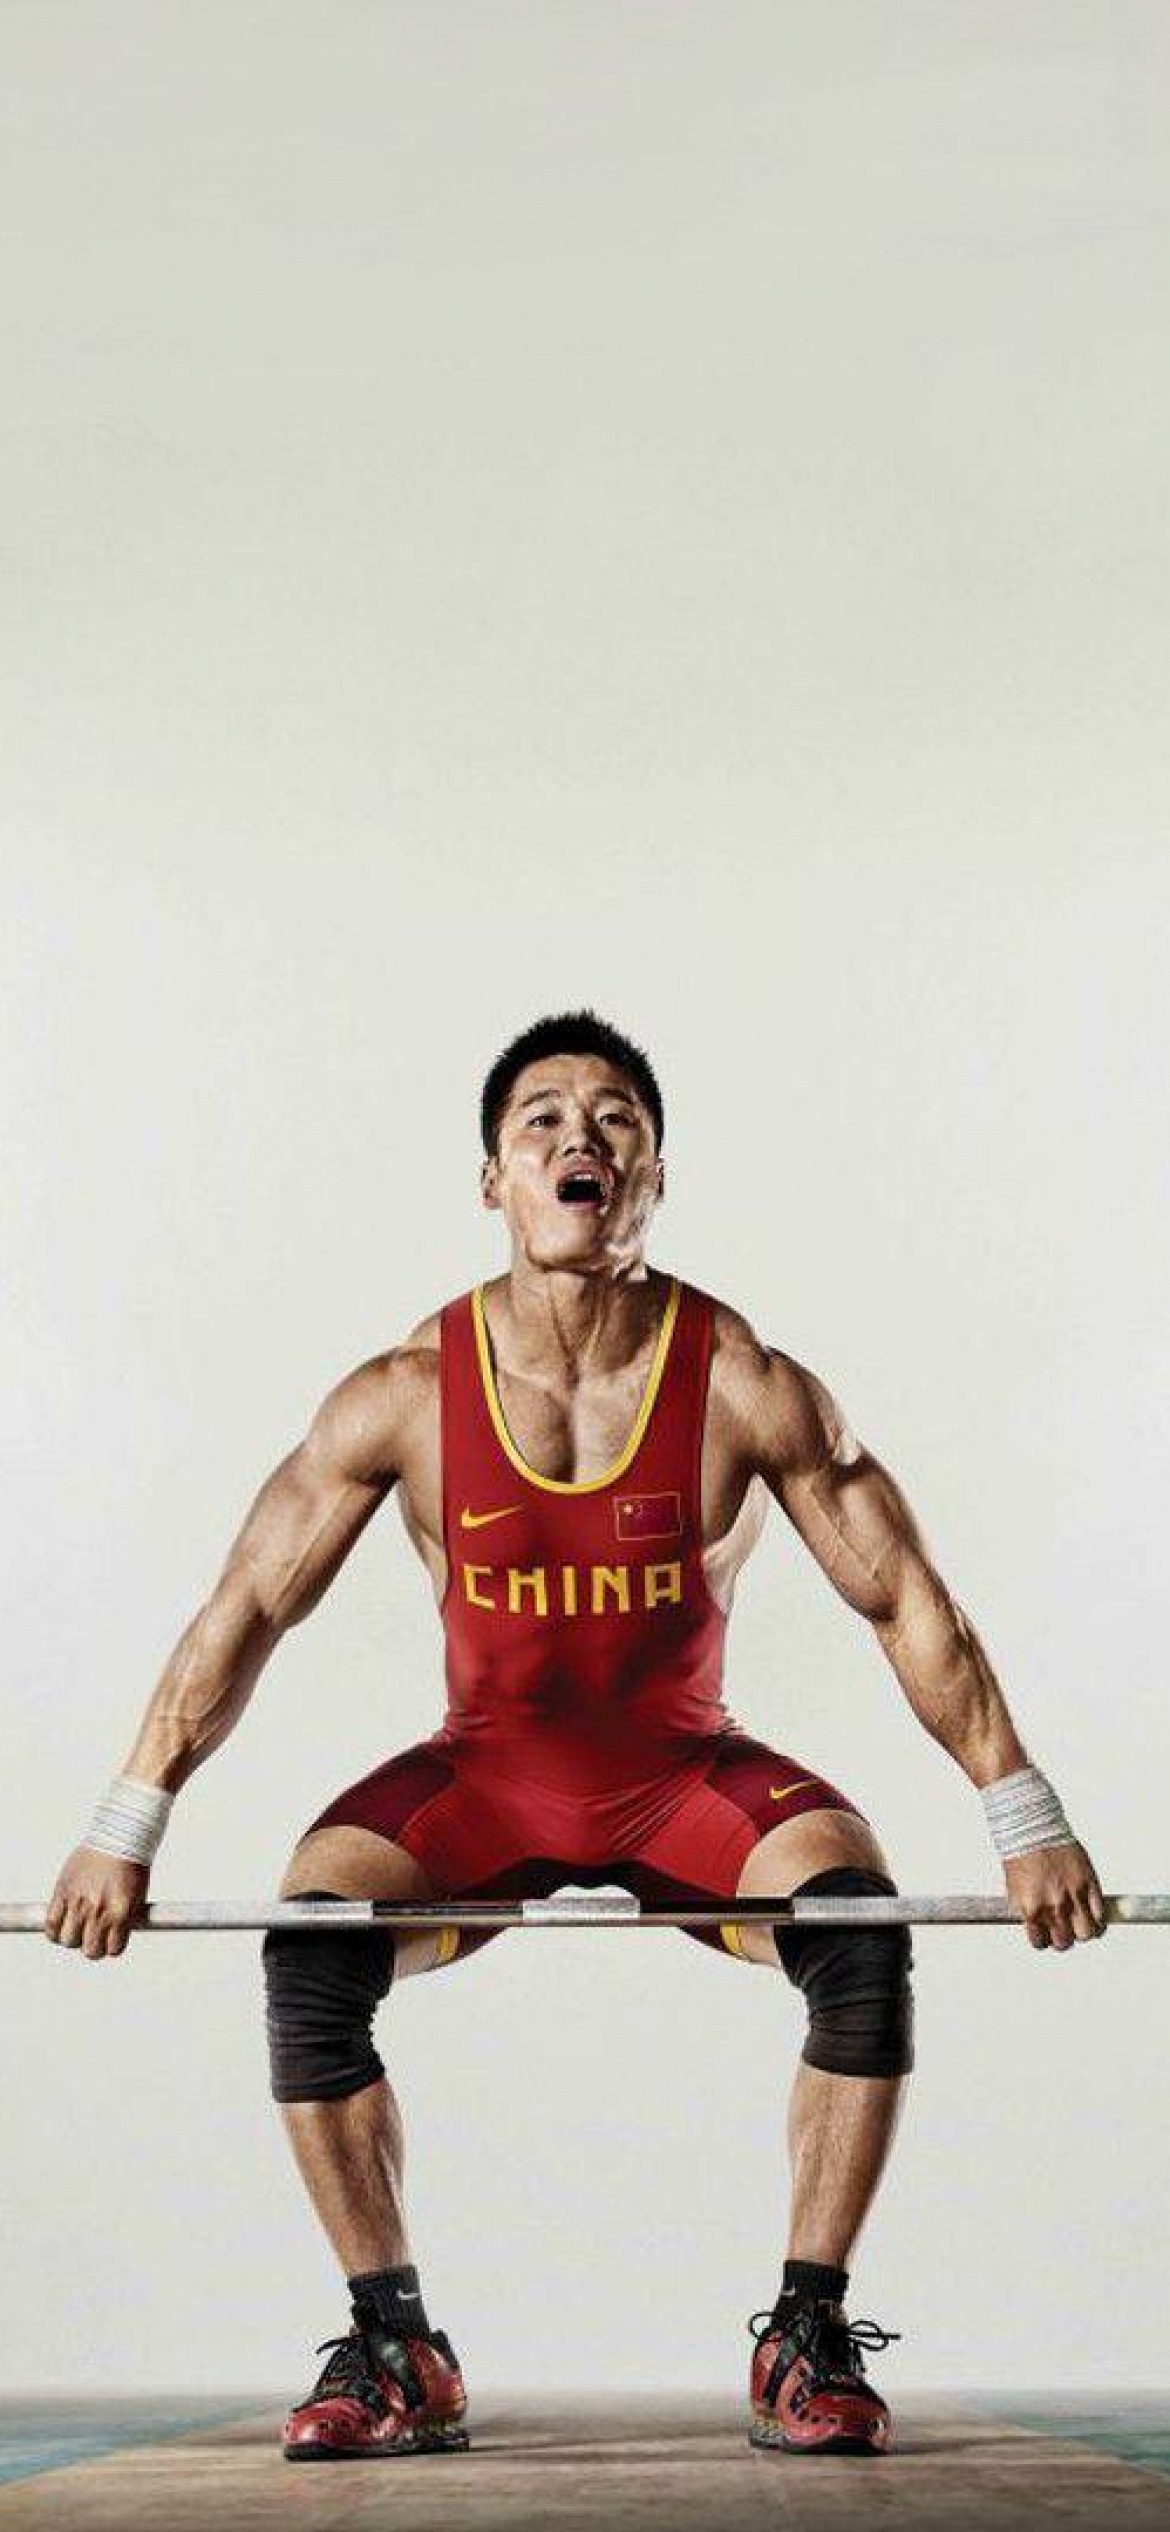 Weightlifting: A squatting position, Powerlifters, Weight training practice, Chinese athlete. 1170x2540 HD Wallpaper.